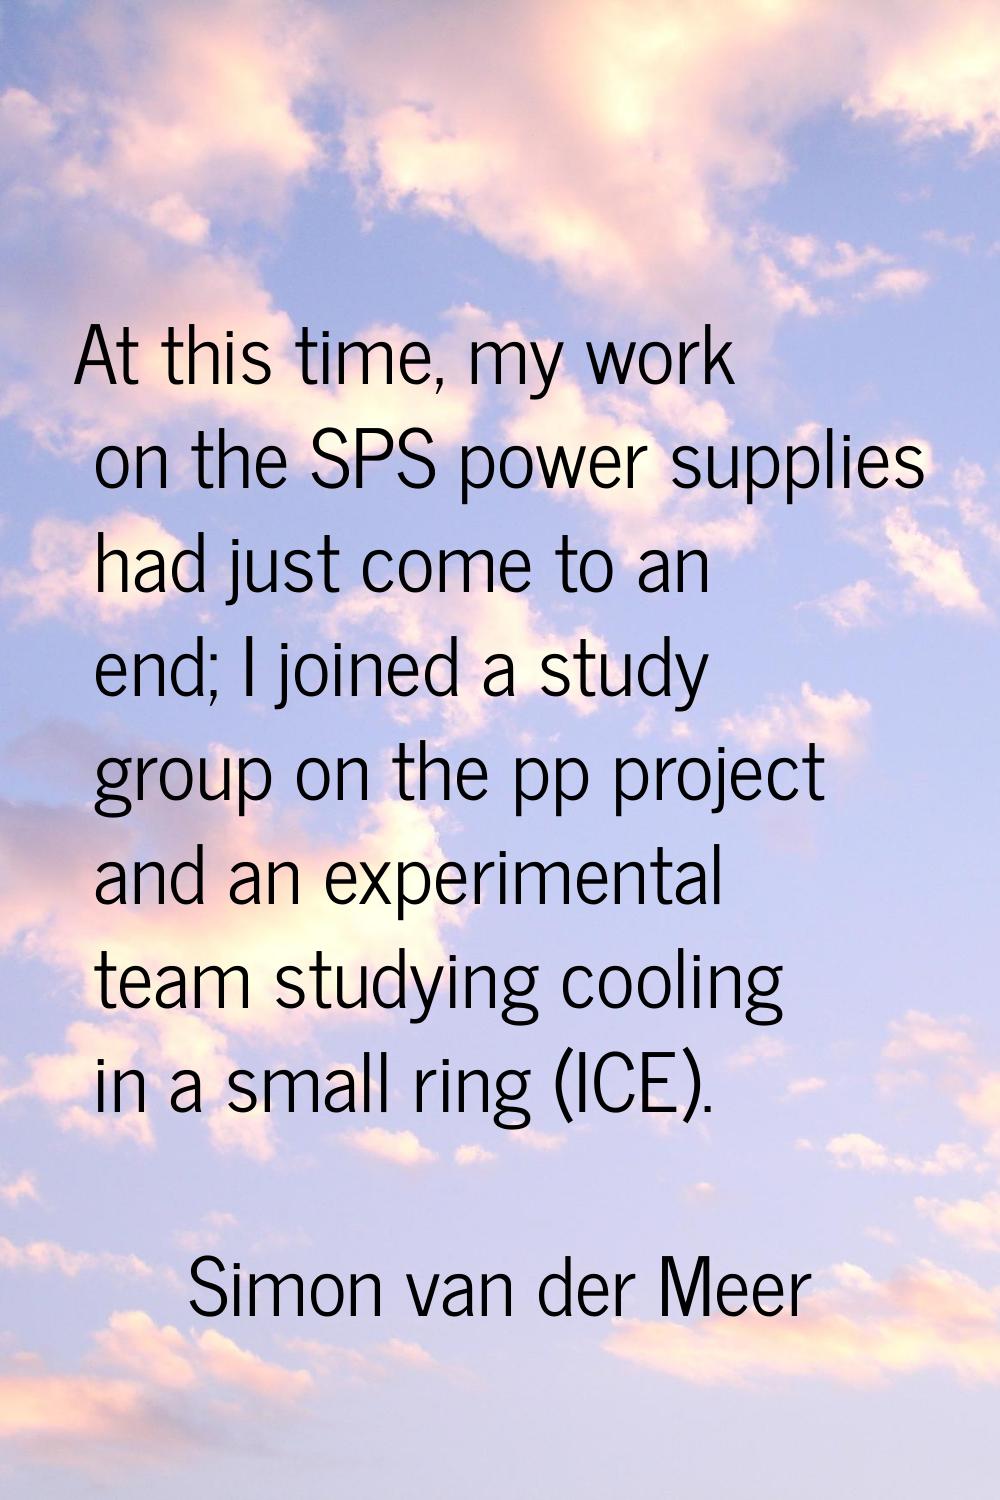 At this time, my work on the SPS power supplies had just come to an end; I joined a study group on 